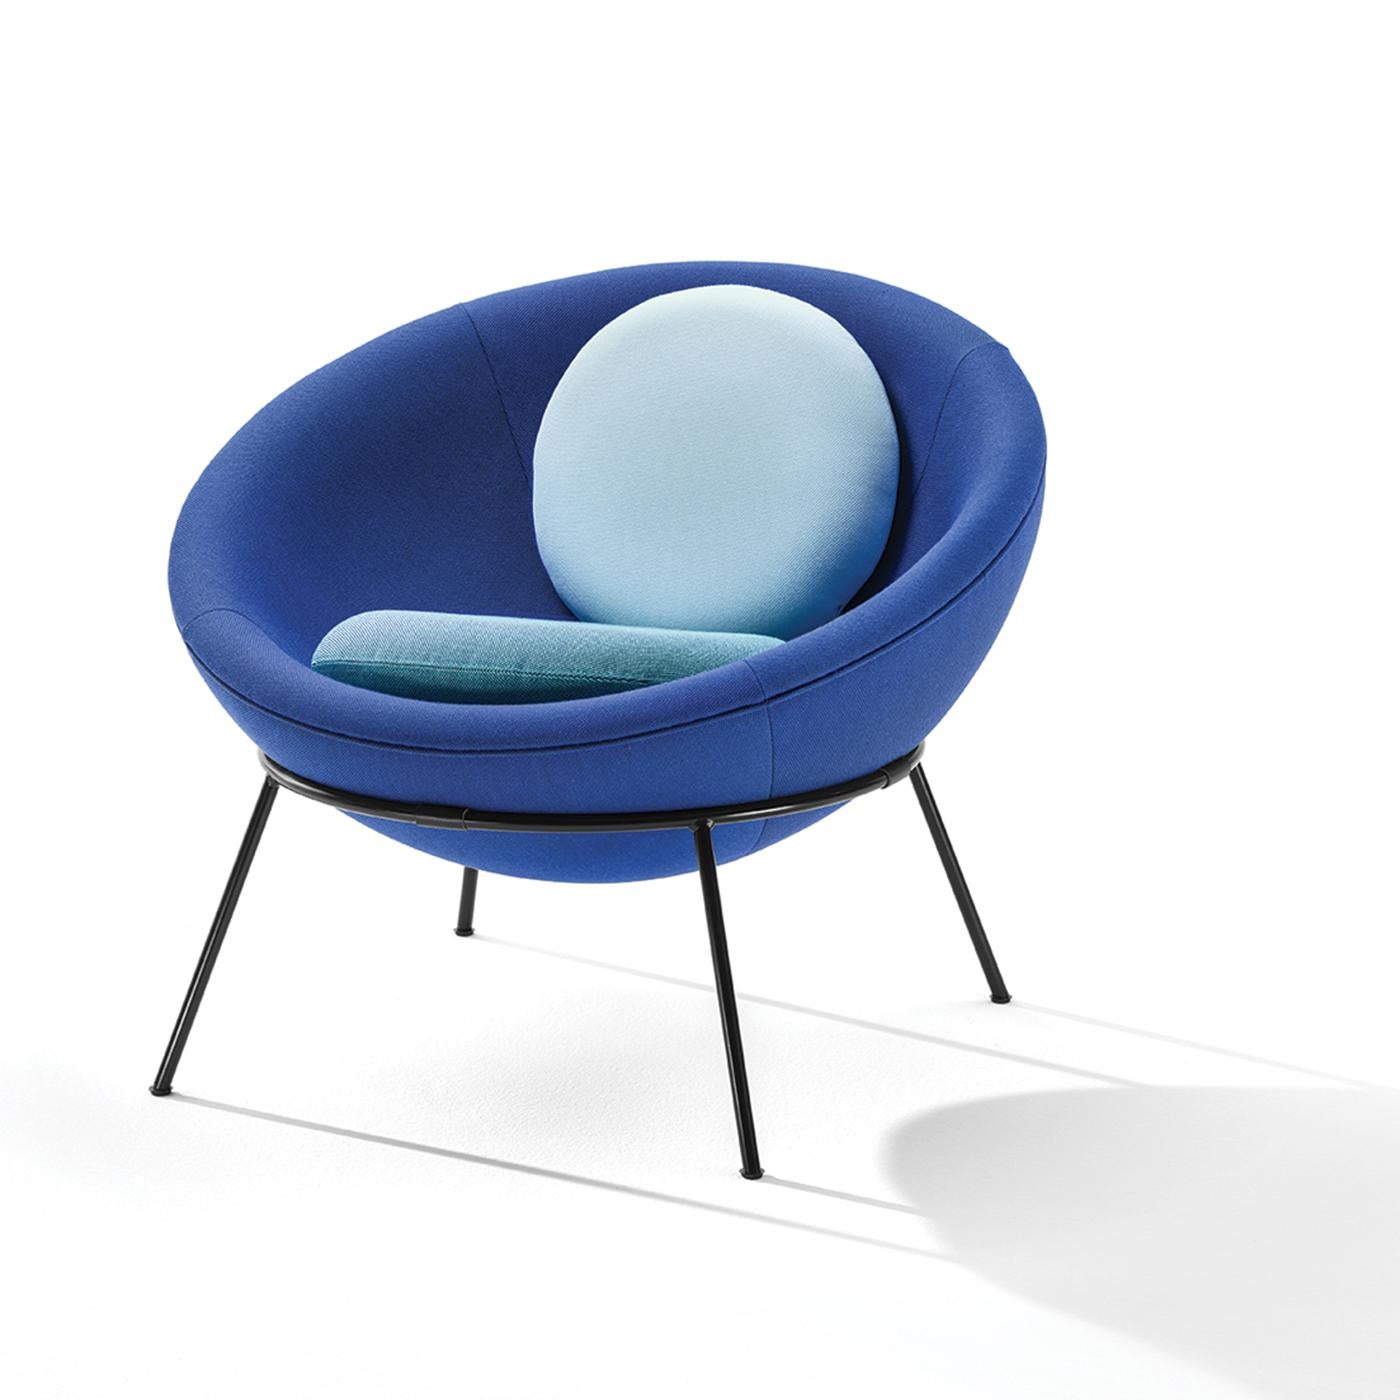 Designed in 1951 by Lina Bo Bardi, the Bardi’s bowl chair is considered a modern design icon. Conceived with an essential frame and universal shape, a semi spherical seat resting lightly on a metallic ring structure supported by four legs - it